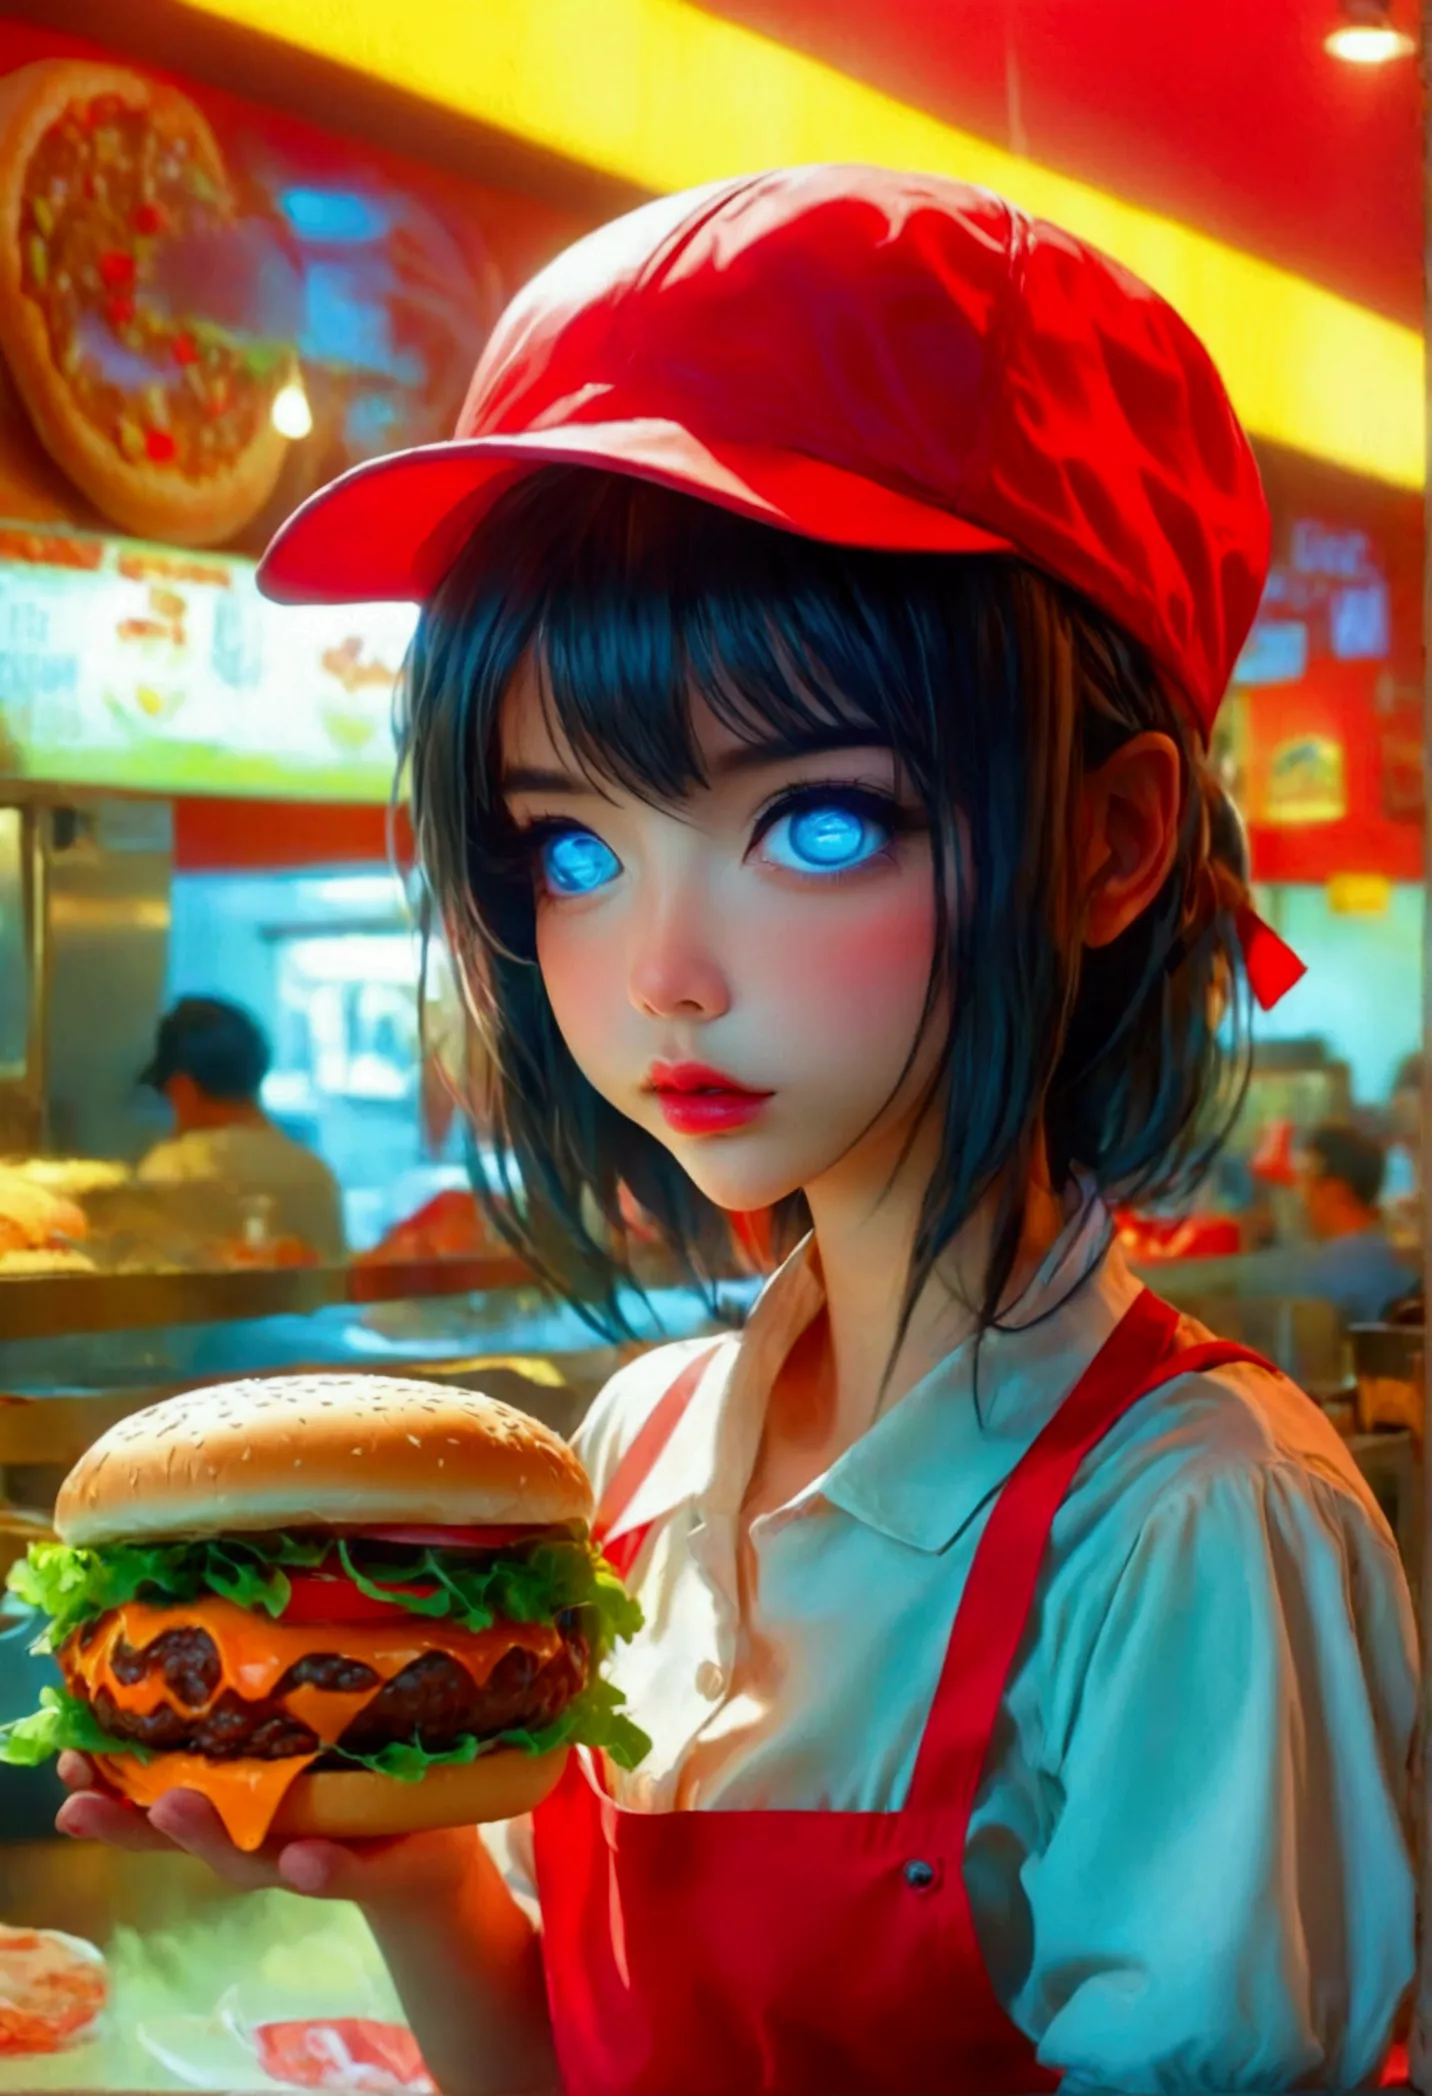 Lovely (, Neon backlit eyes, Obvious mechanical joints, Aprons and hats, nude) An employee of the Puny Humans fast food restaura...